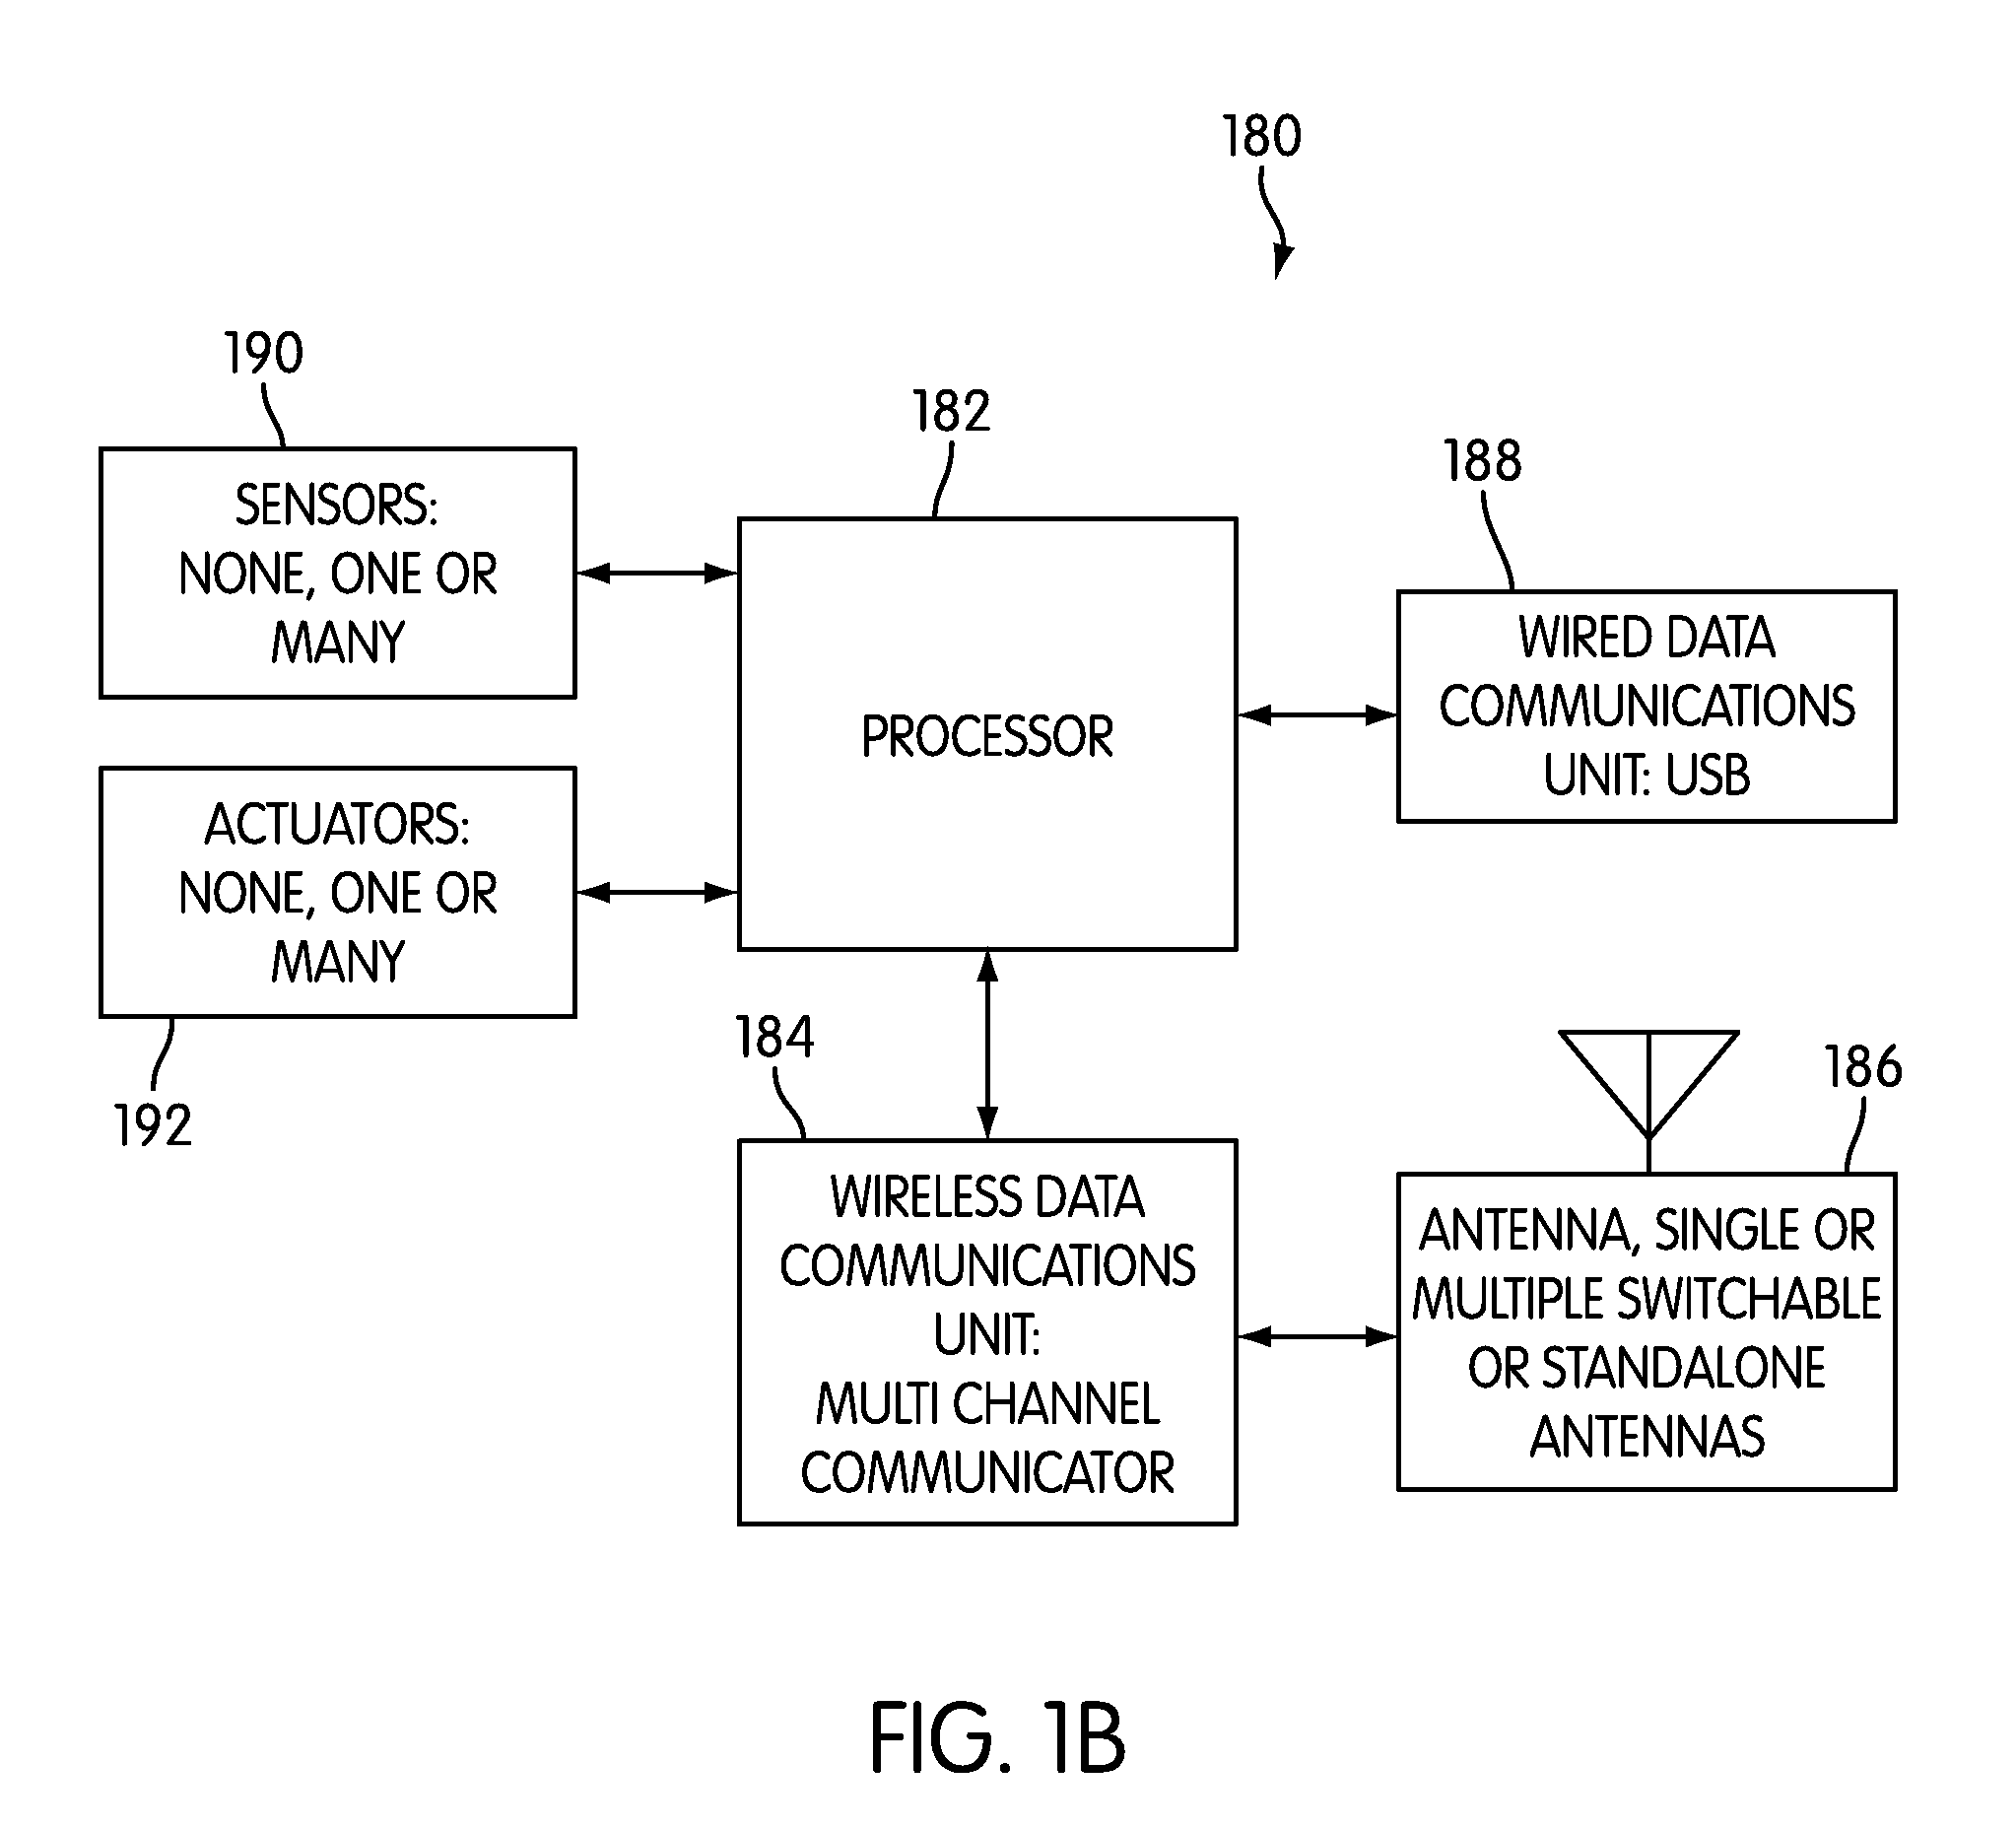 Wearable Wireless Electronic Patient Data Communications and Physiological Monitoring Device